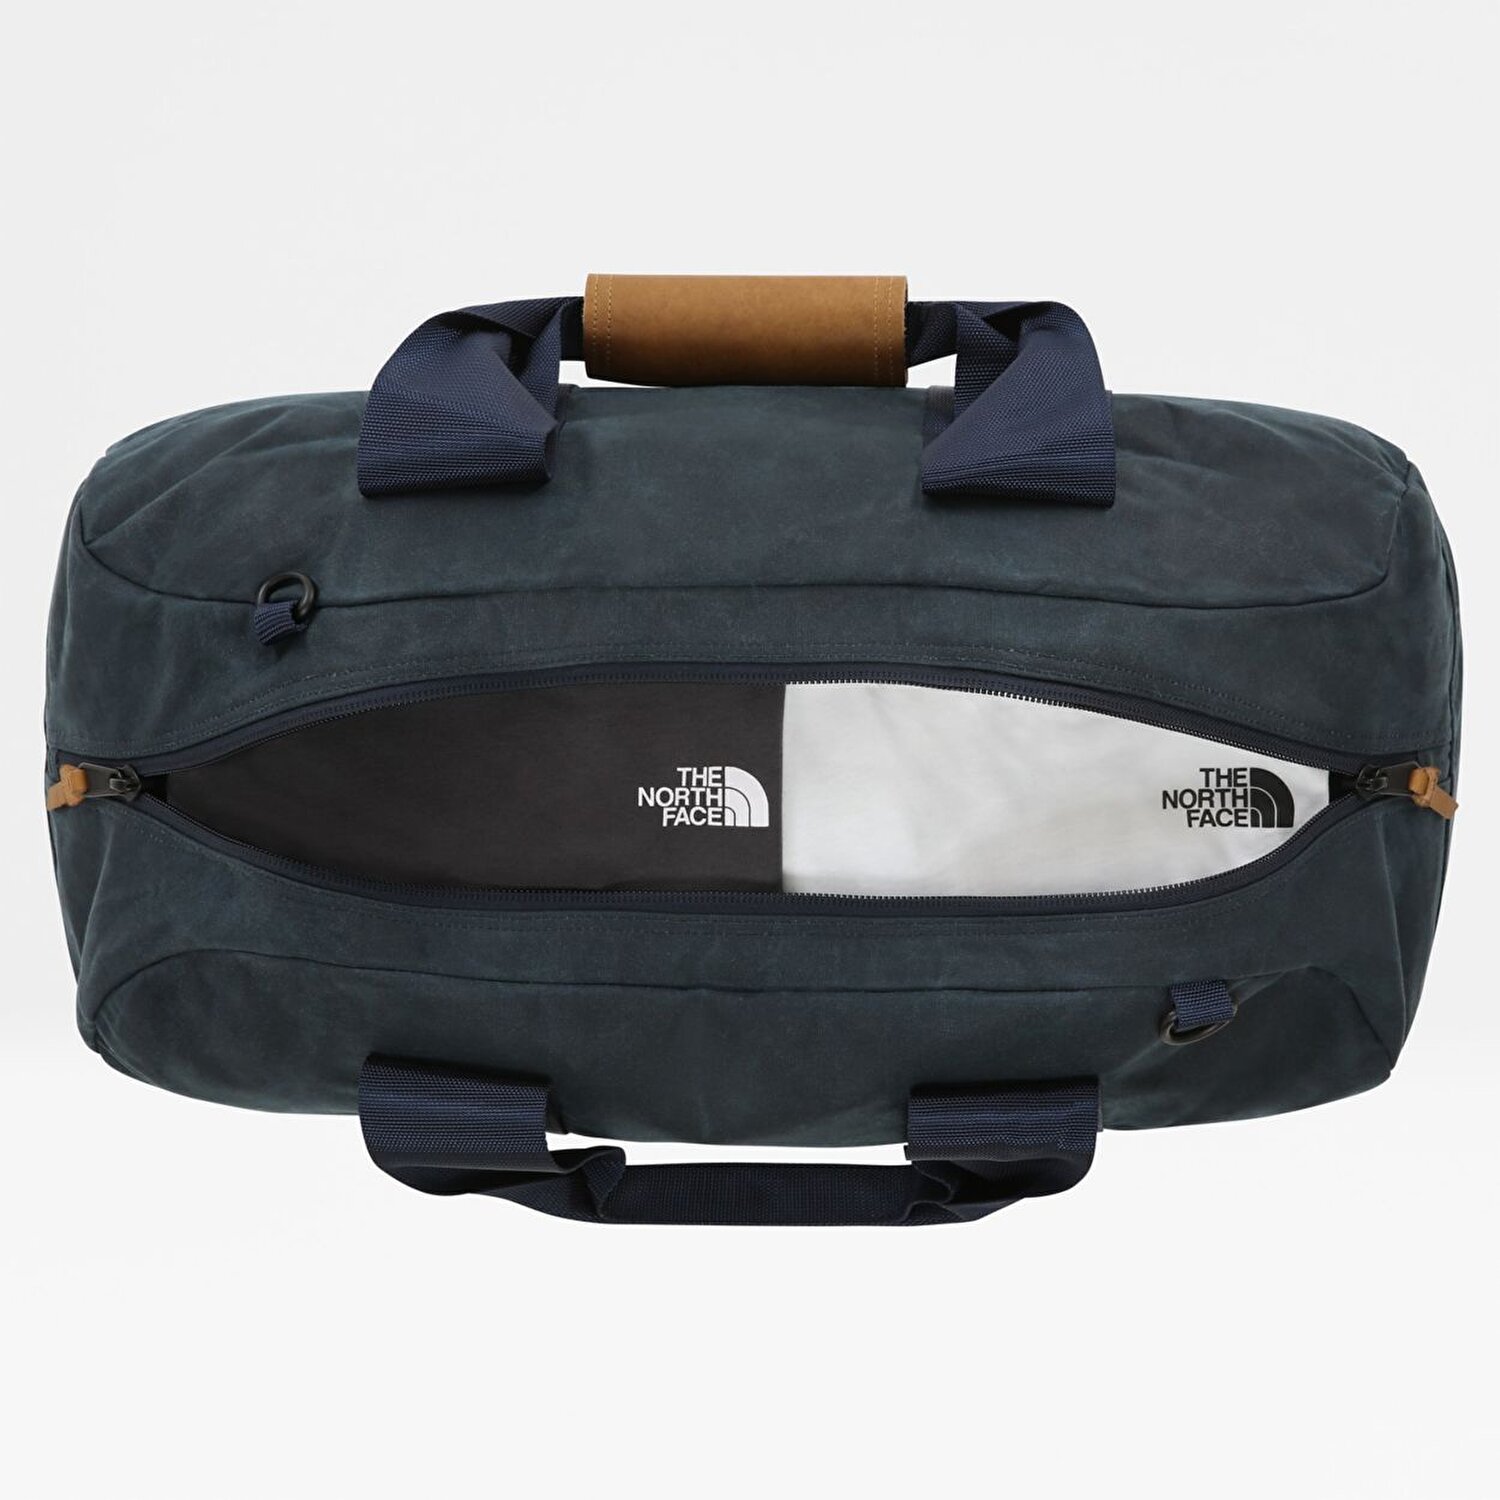 The North Face BERKELEY DUFFEL SPECIAL EDITION - S. 2